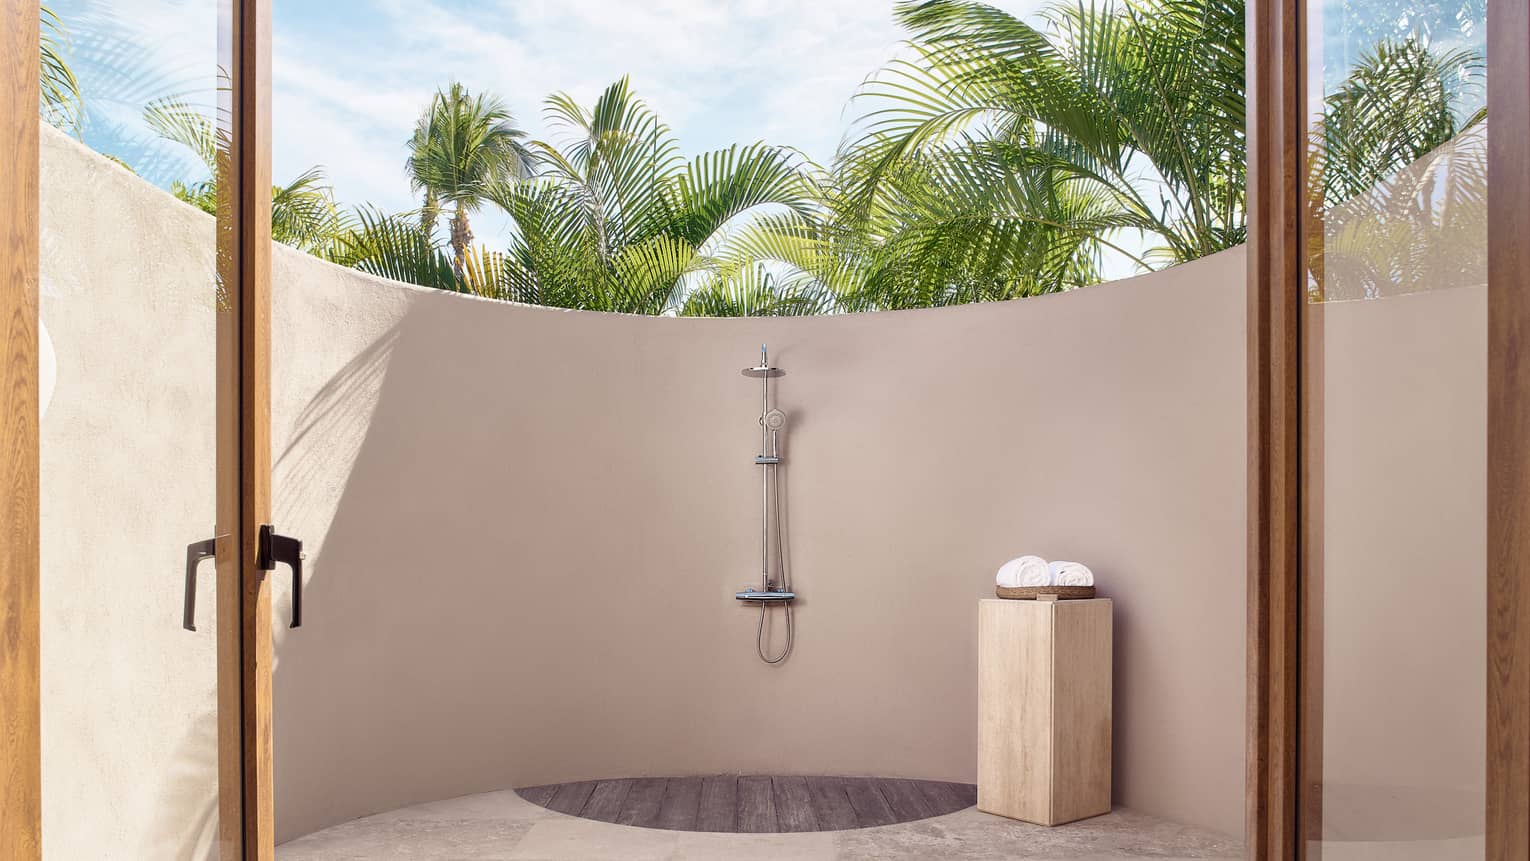 Arena Beach House high-walled stucco outdoor shower, palm trees providing privacy and shade